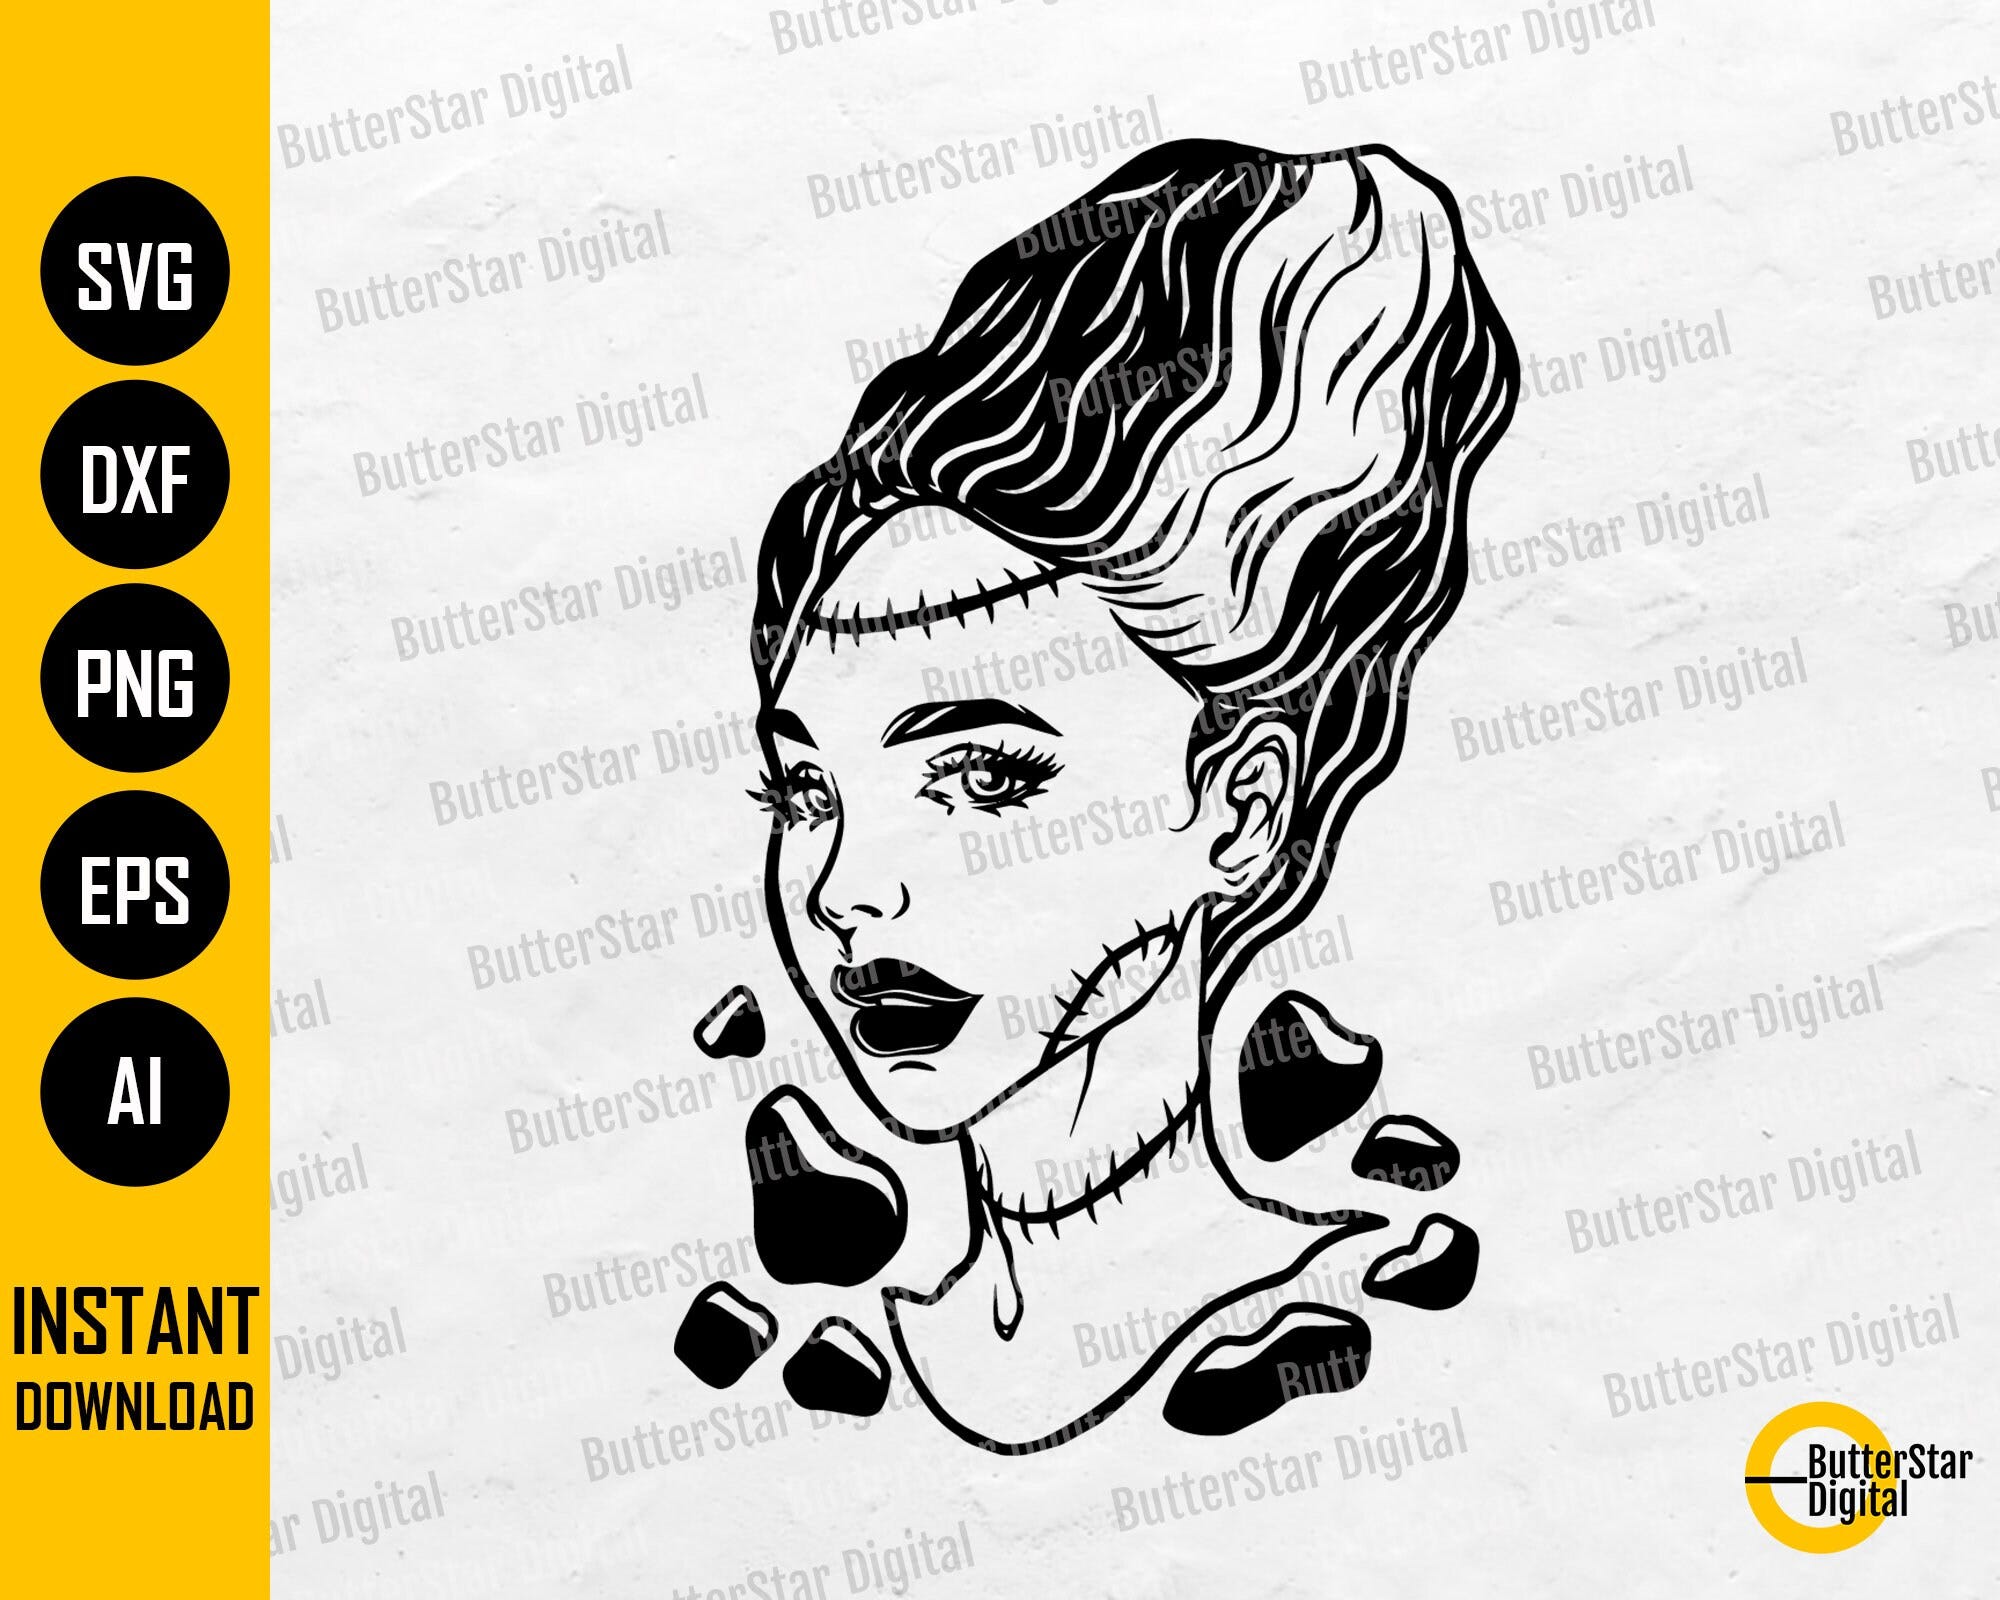 Bride Of Frankenstein SVG | Horror SVG | Halloween T-Shirt Vinyl Stencil Decal Graphics | Cutting File Clipart Vector Digital Dxf Png Eps Ai